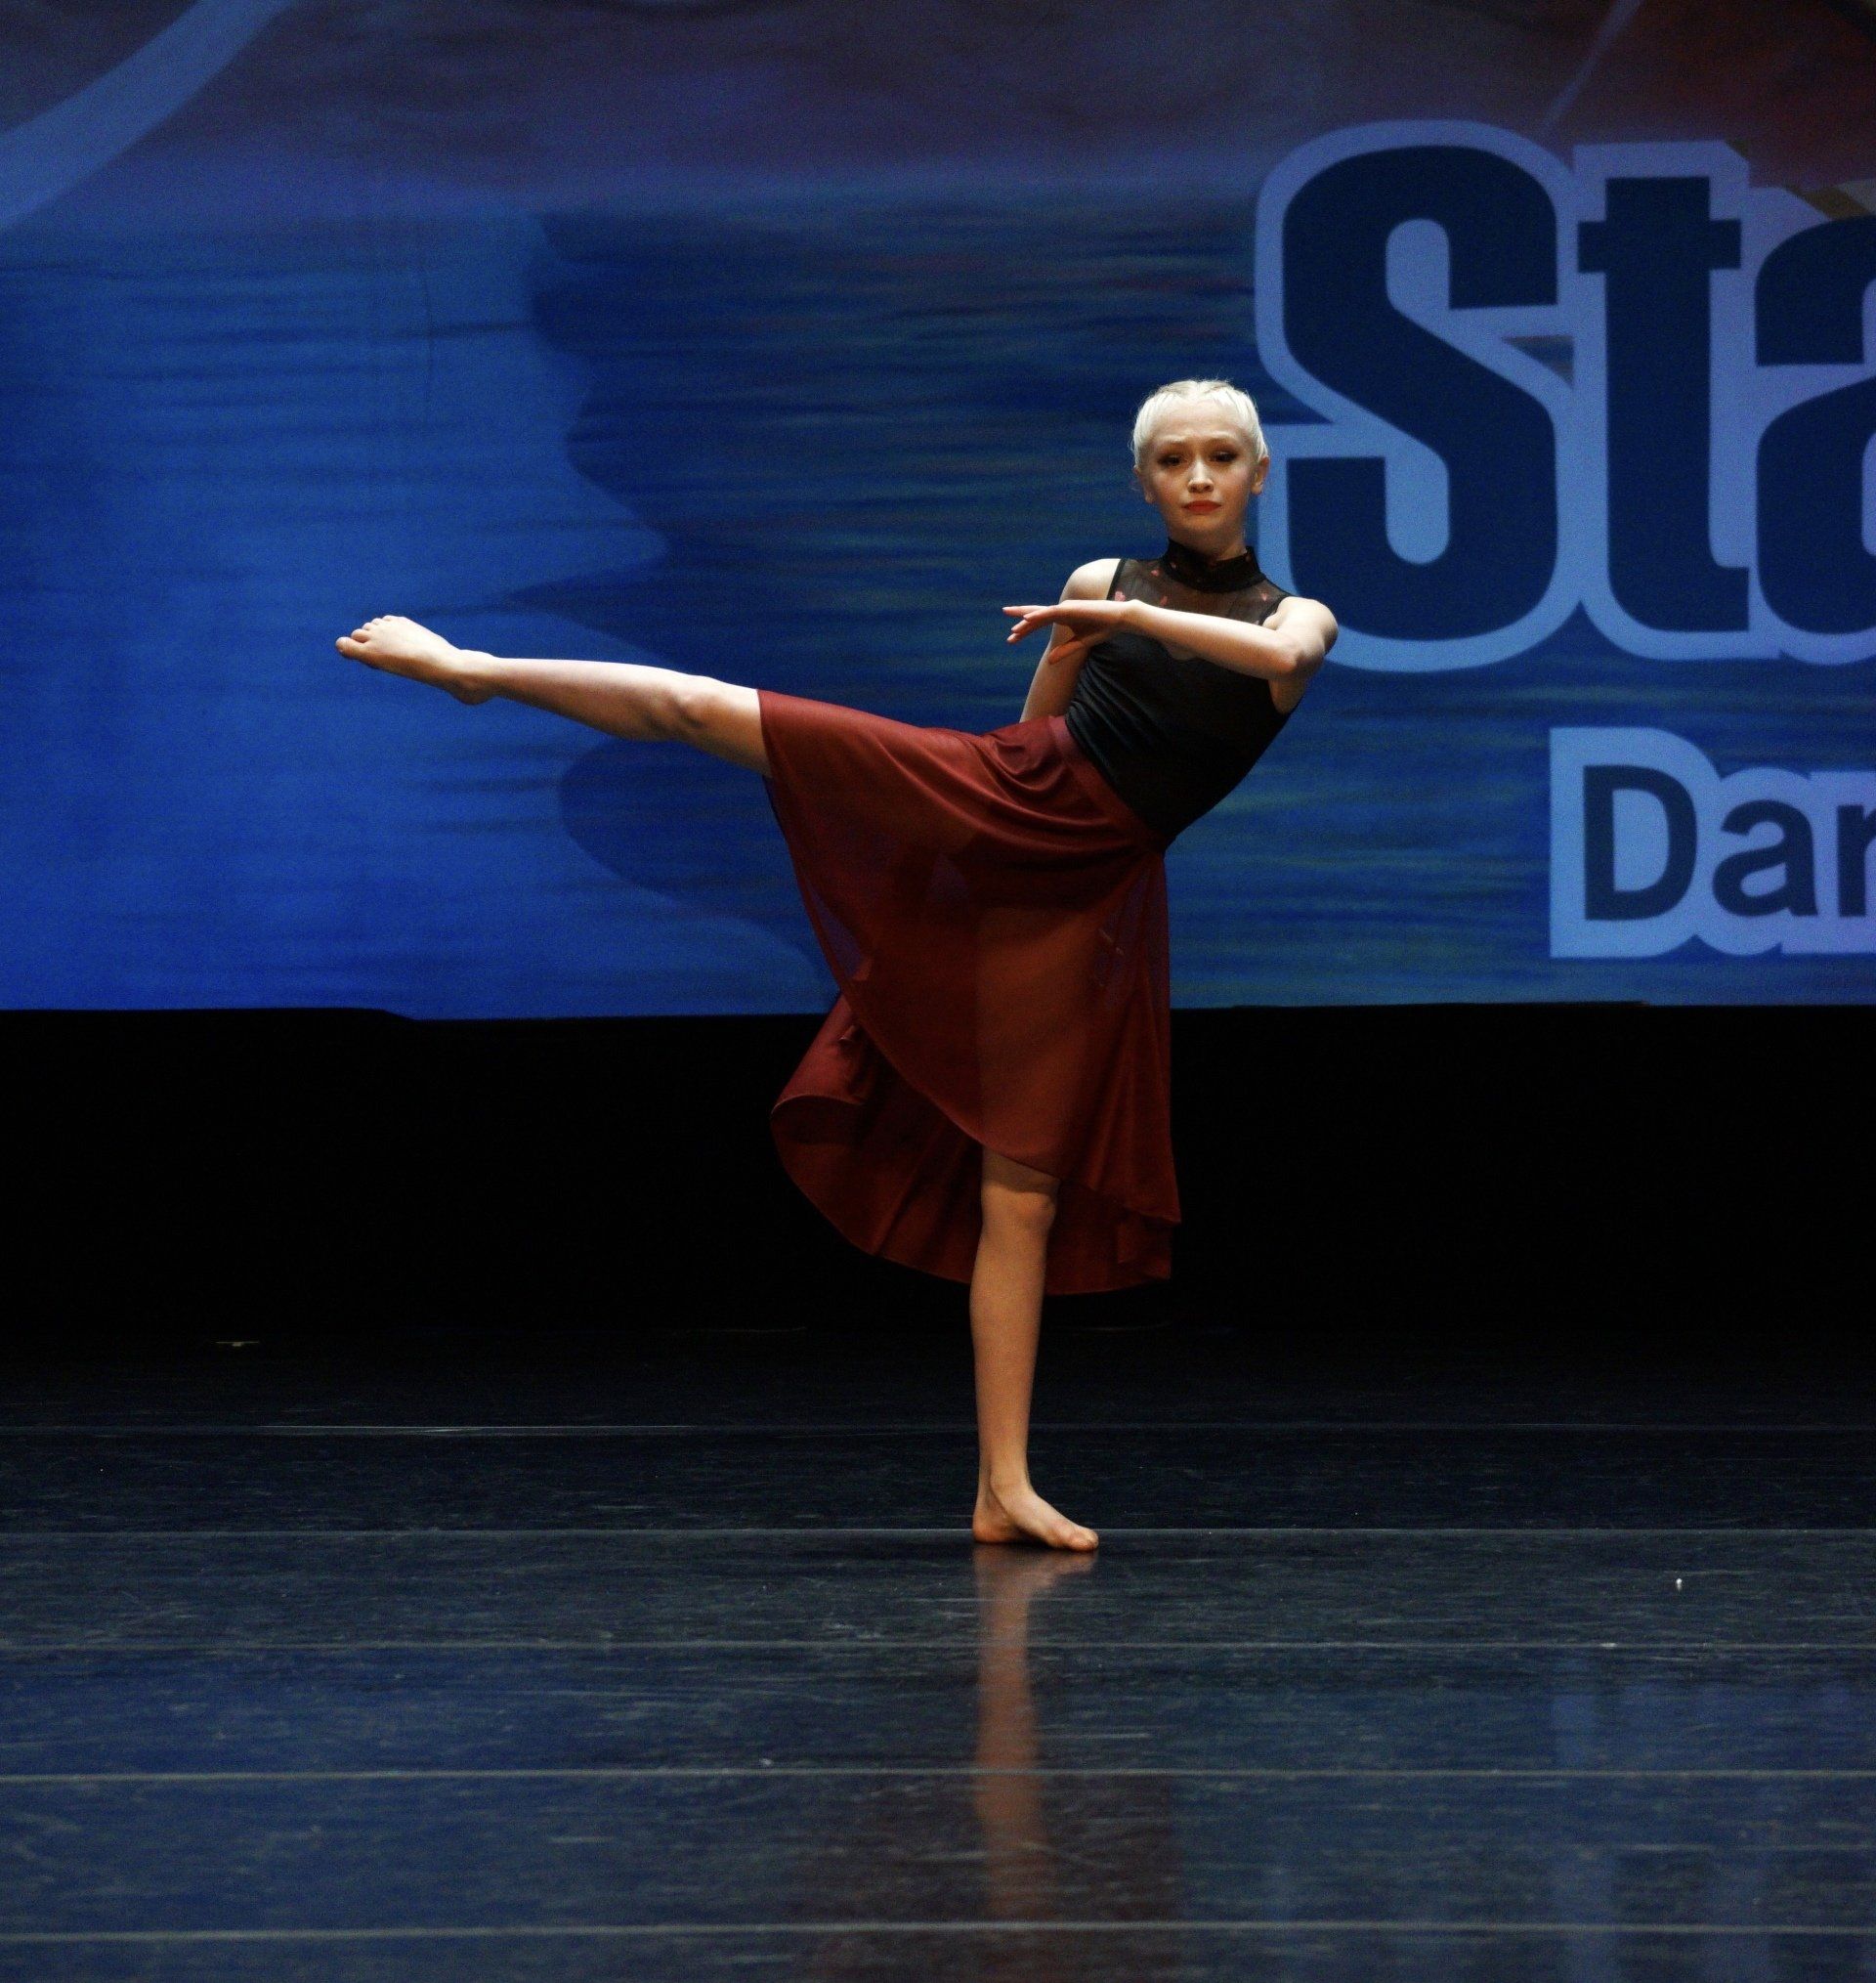 Star Talent Dance Competition Tour 2020 Vancouver, Island, and Kelowna